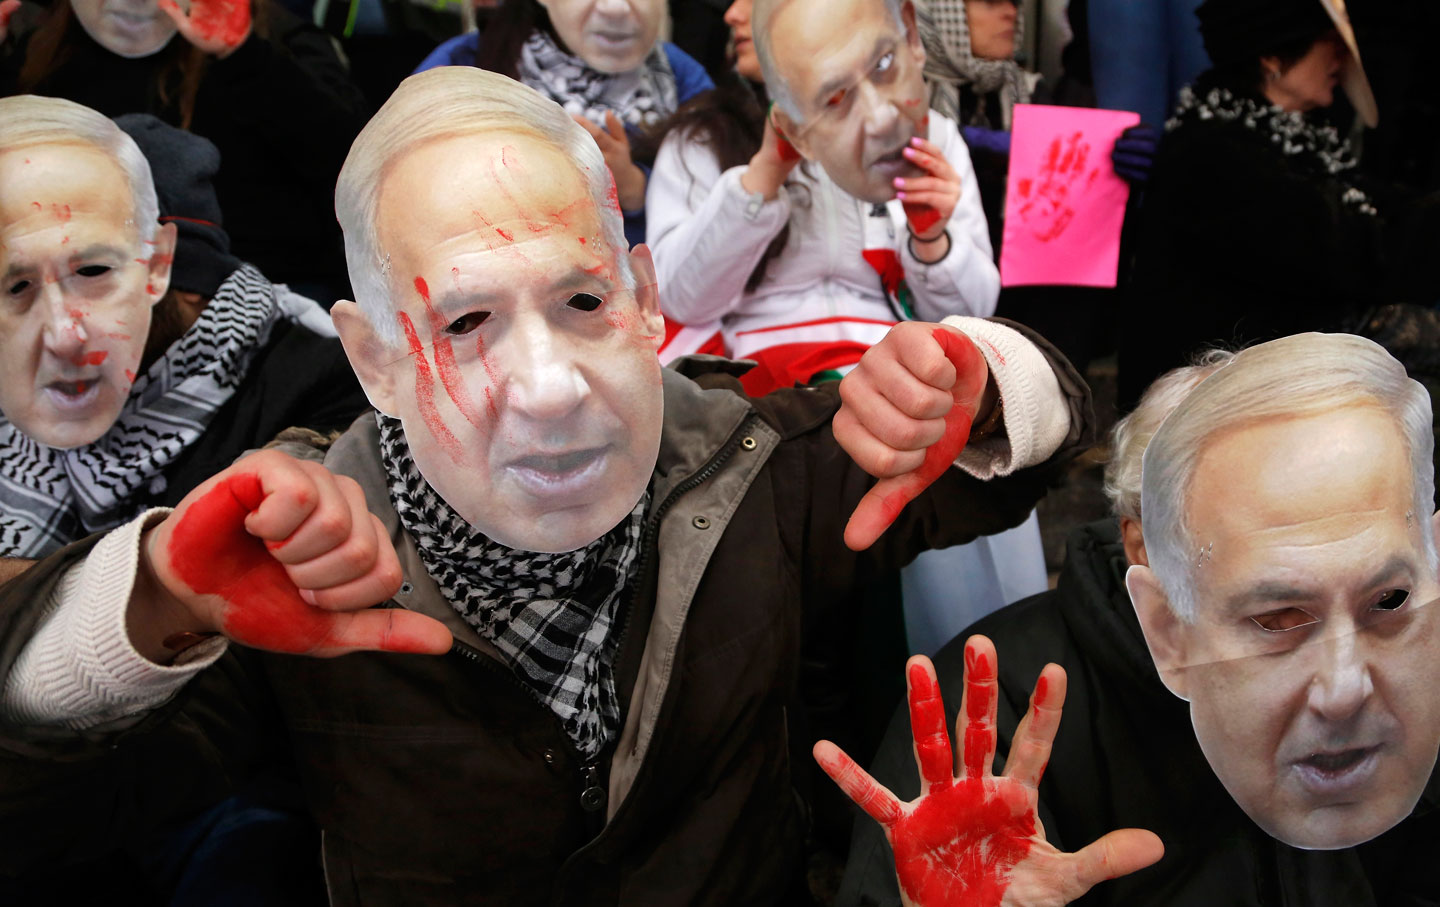 Demonstrators led by the protest group Code Pink wear masks of Israeli Prime Minister Benjamin Netanyahu as they sit at the entrance to the AIPAC policy conference, March 1, 2015.